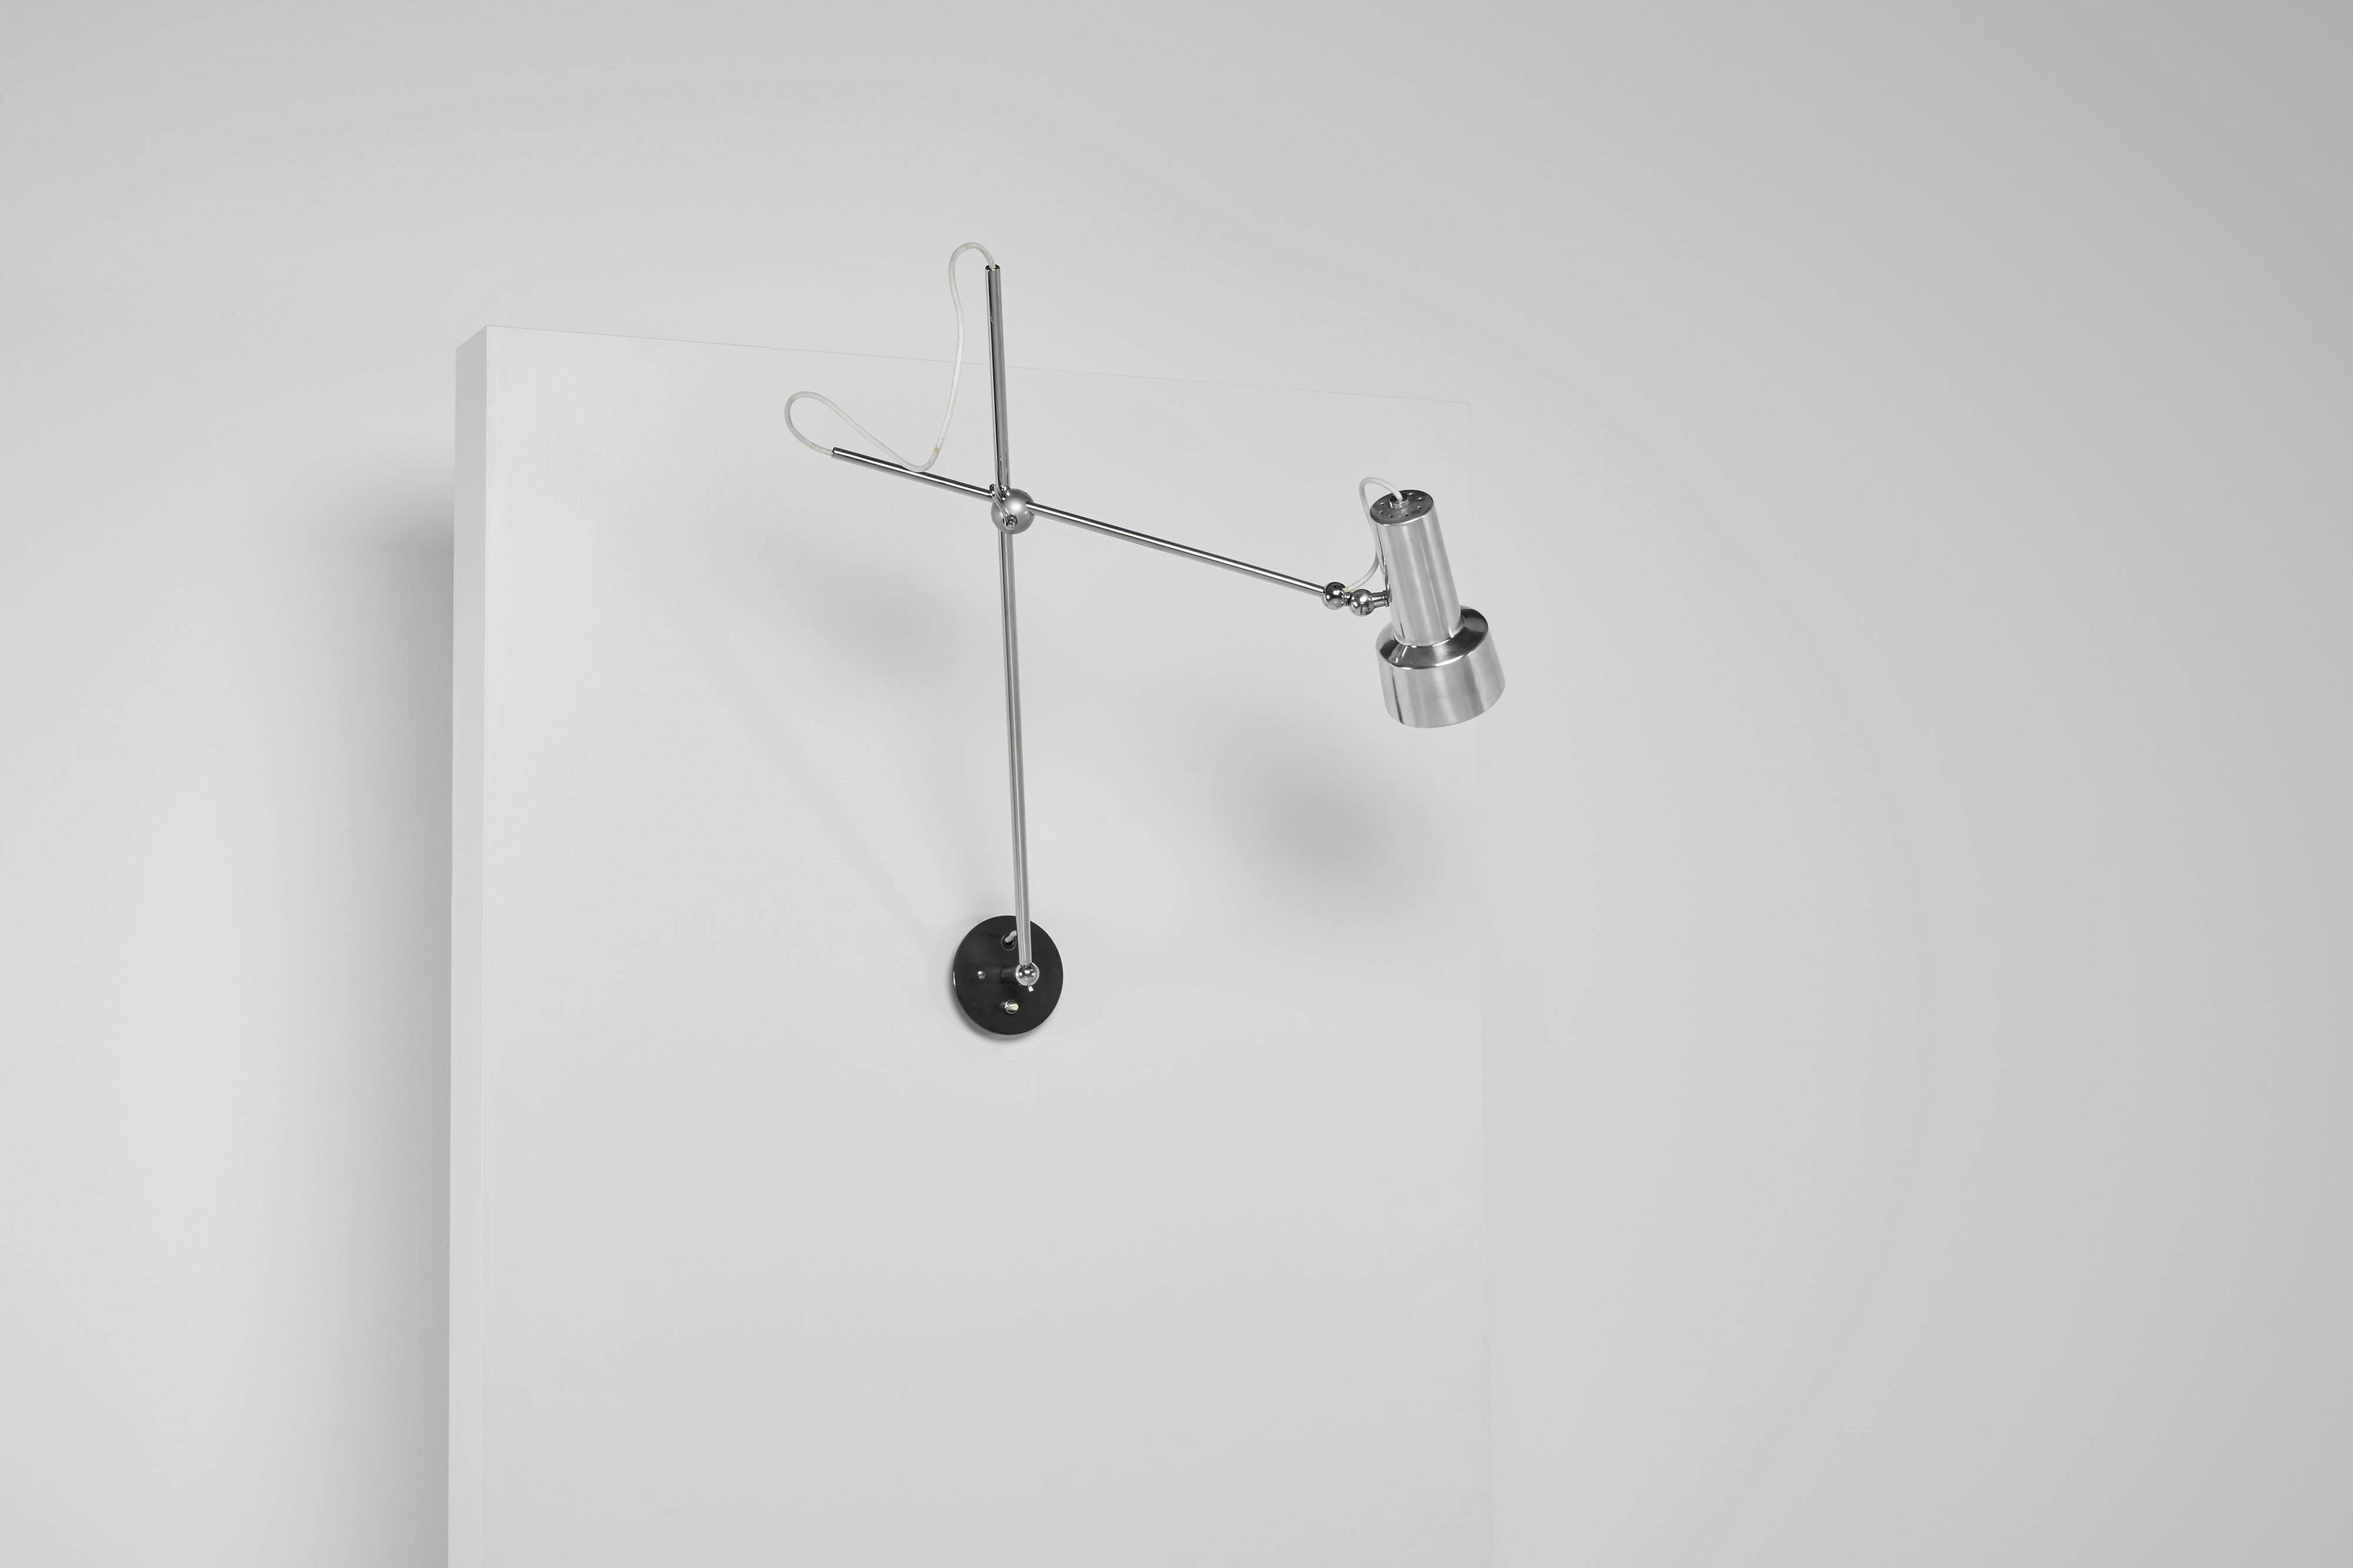 Minimalistic model 213 wall lamp by Gino Sarfatti and manufactured by Arteluce in Italy 1956. This lamp features a direct wall fixture, cleverly designed with chrome-plated brass arms connected by a ball joint, allowing you to easily adjust the